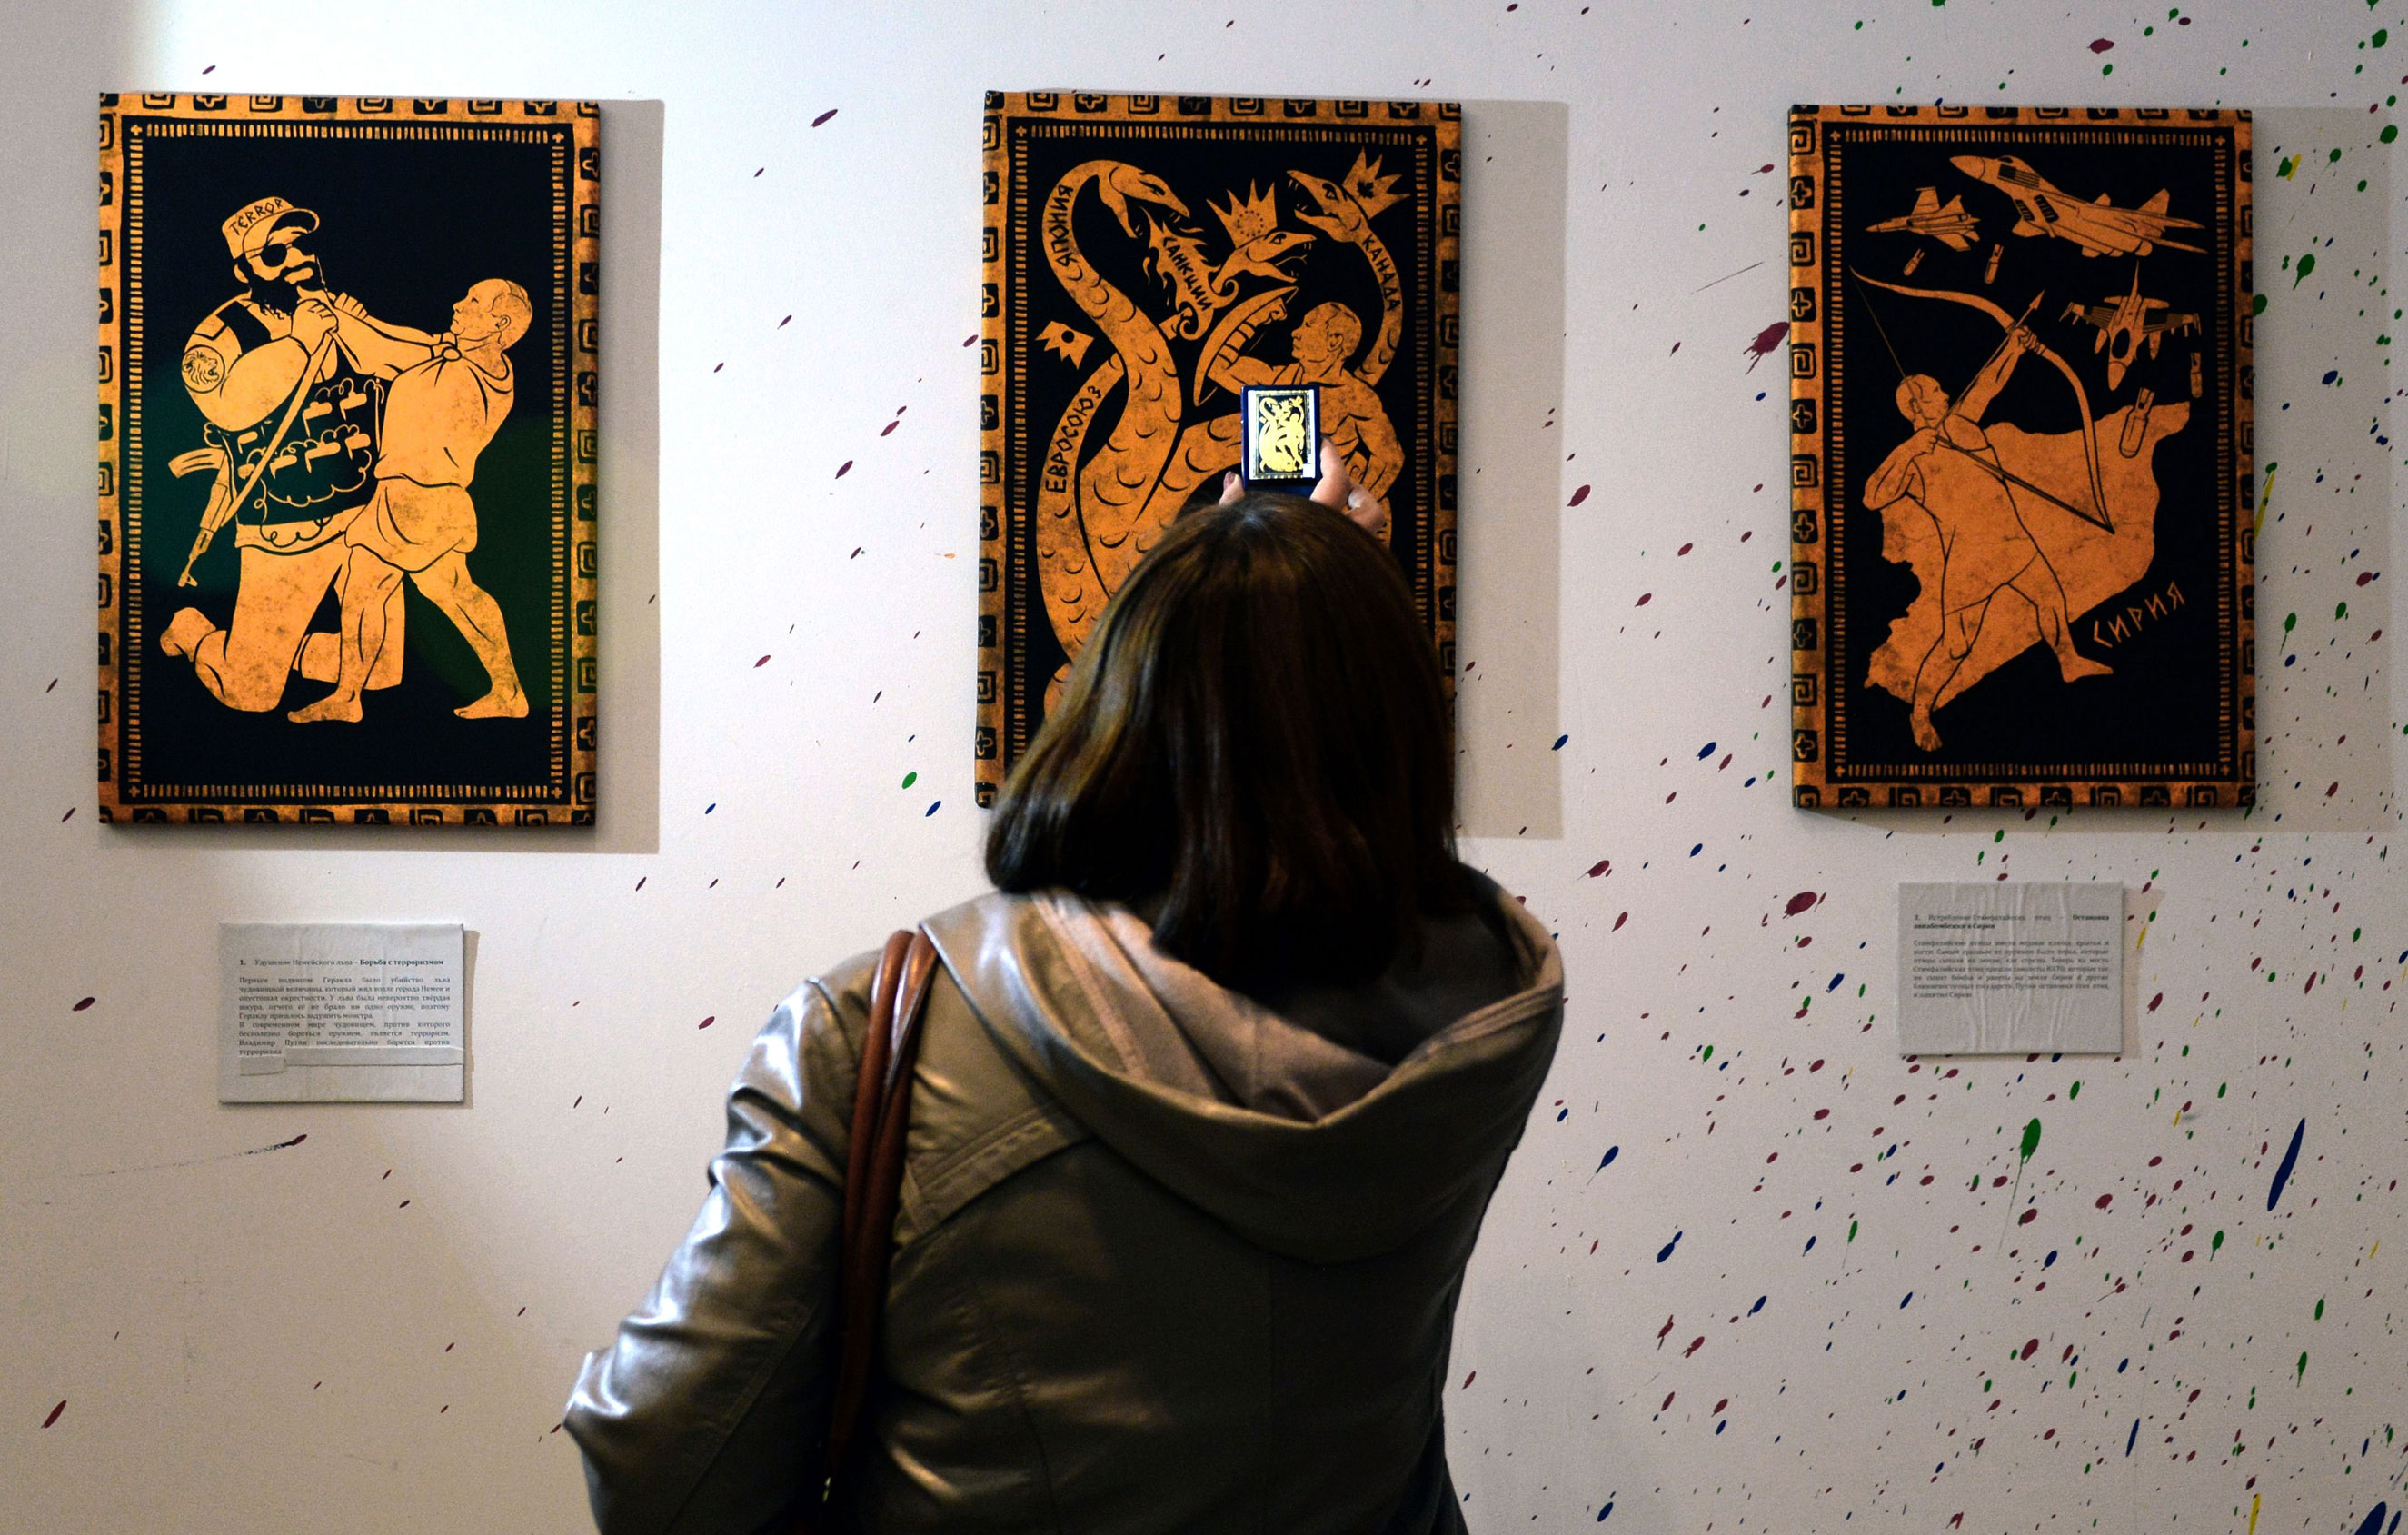 A visitor takes photos of the paintings during the "12 Labours of Putin" art exhibition on Oct. 6, 2014 marking the 60th birthday of Russia's President Vladimir Putin at the design workshop in Moscow. (Vasily Maximov—AFP/Getty Images)